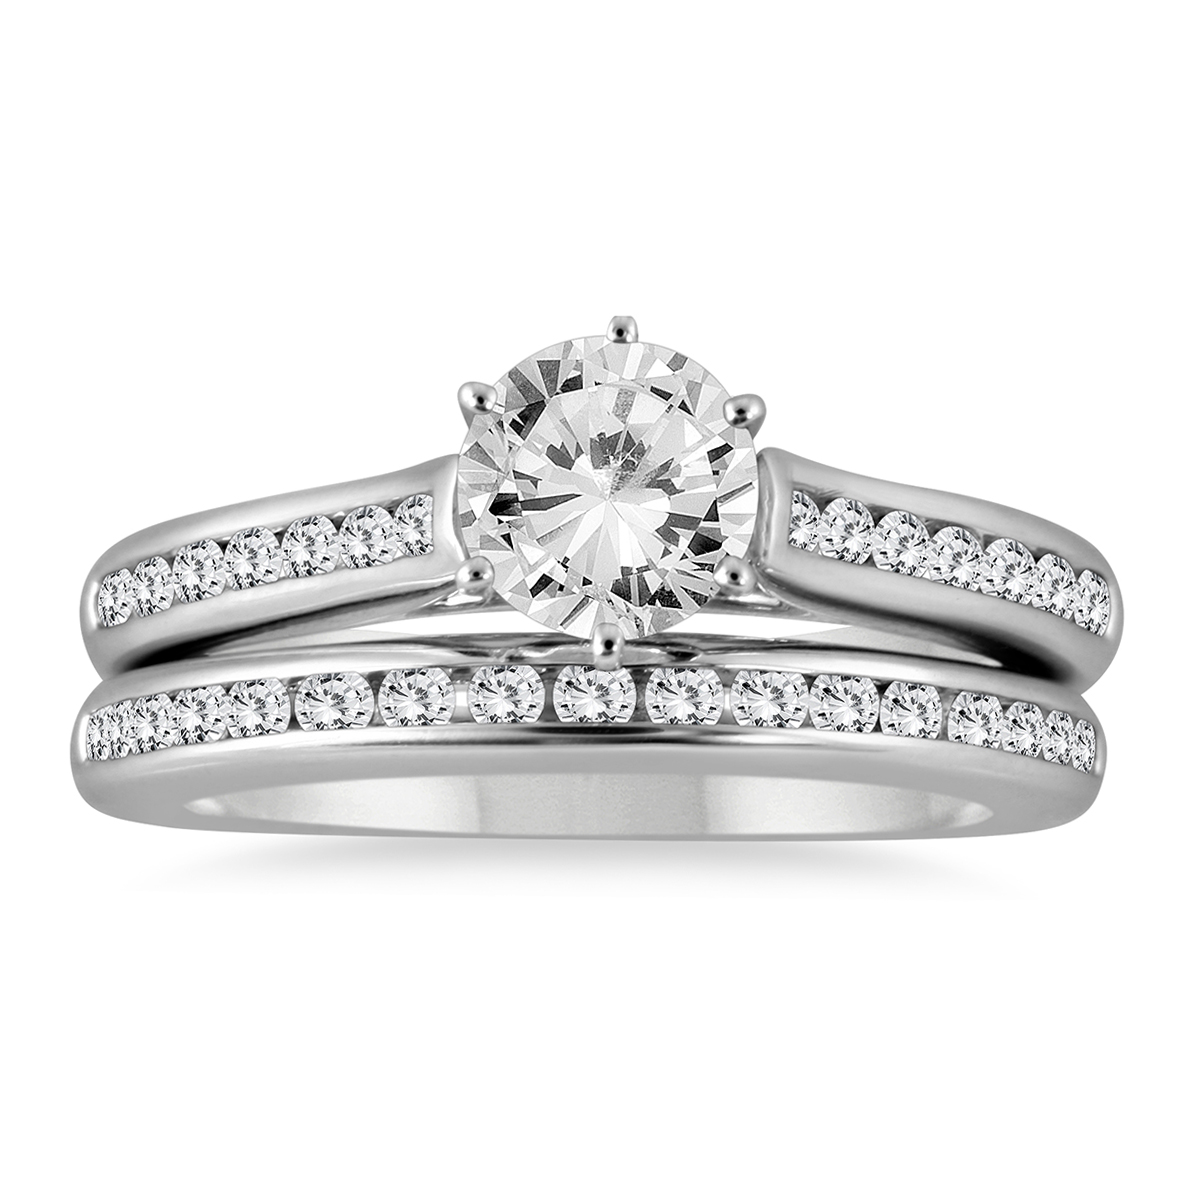 Image of AGS Certified 1 5/8 Carat Diamond Bridal Set in 14K White Gold (I-J Color I2-I3 Clarity)